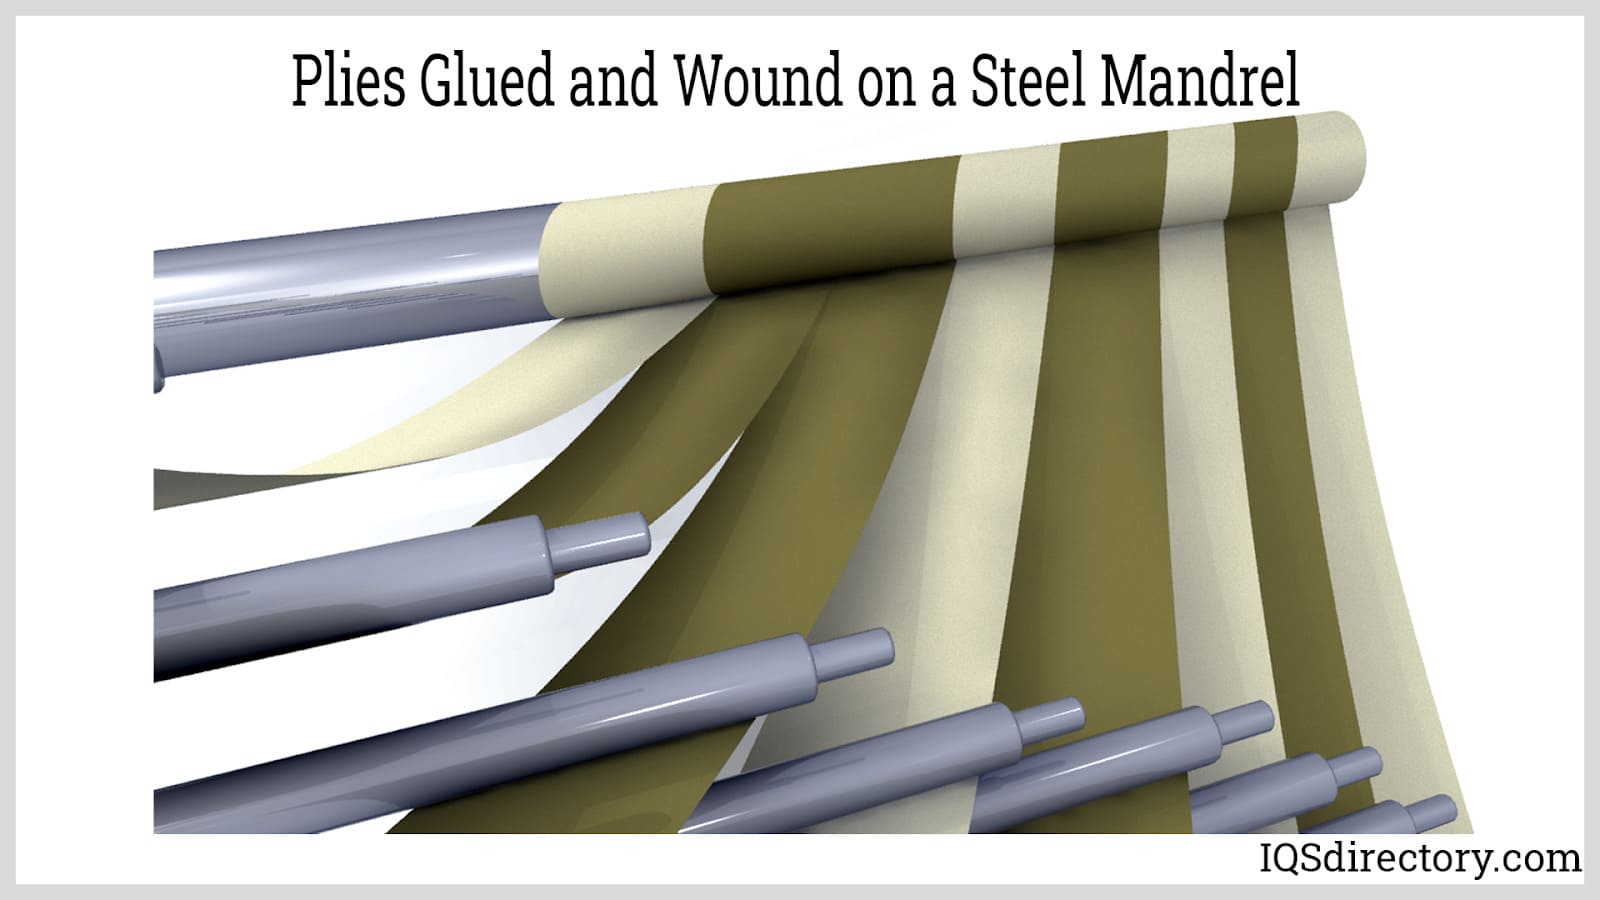 Plies Glued and Wound on a Steel Mandrel